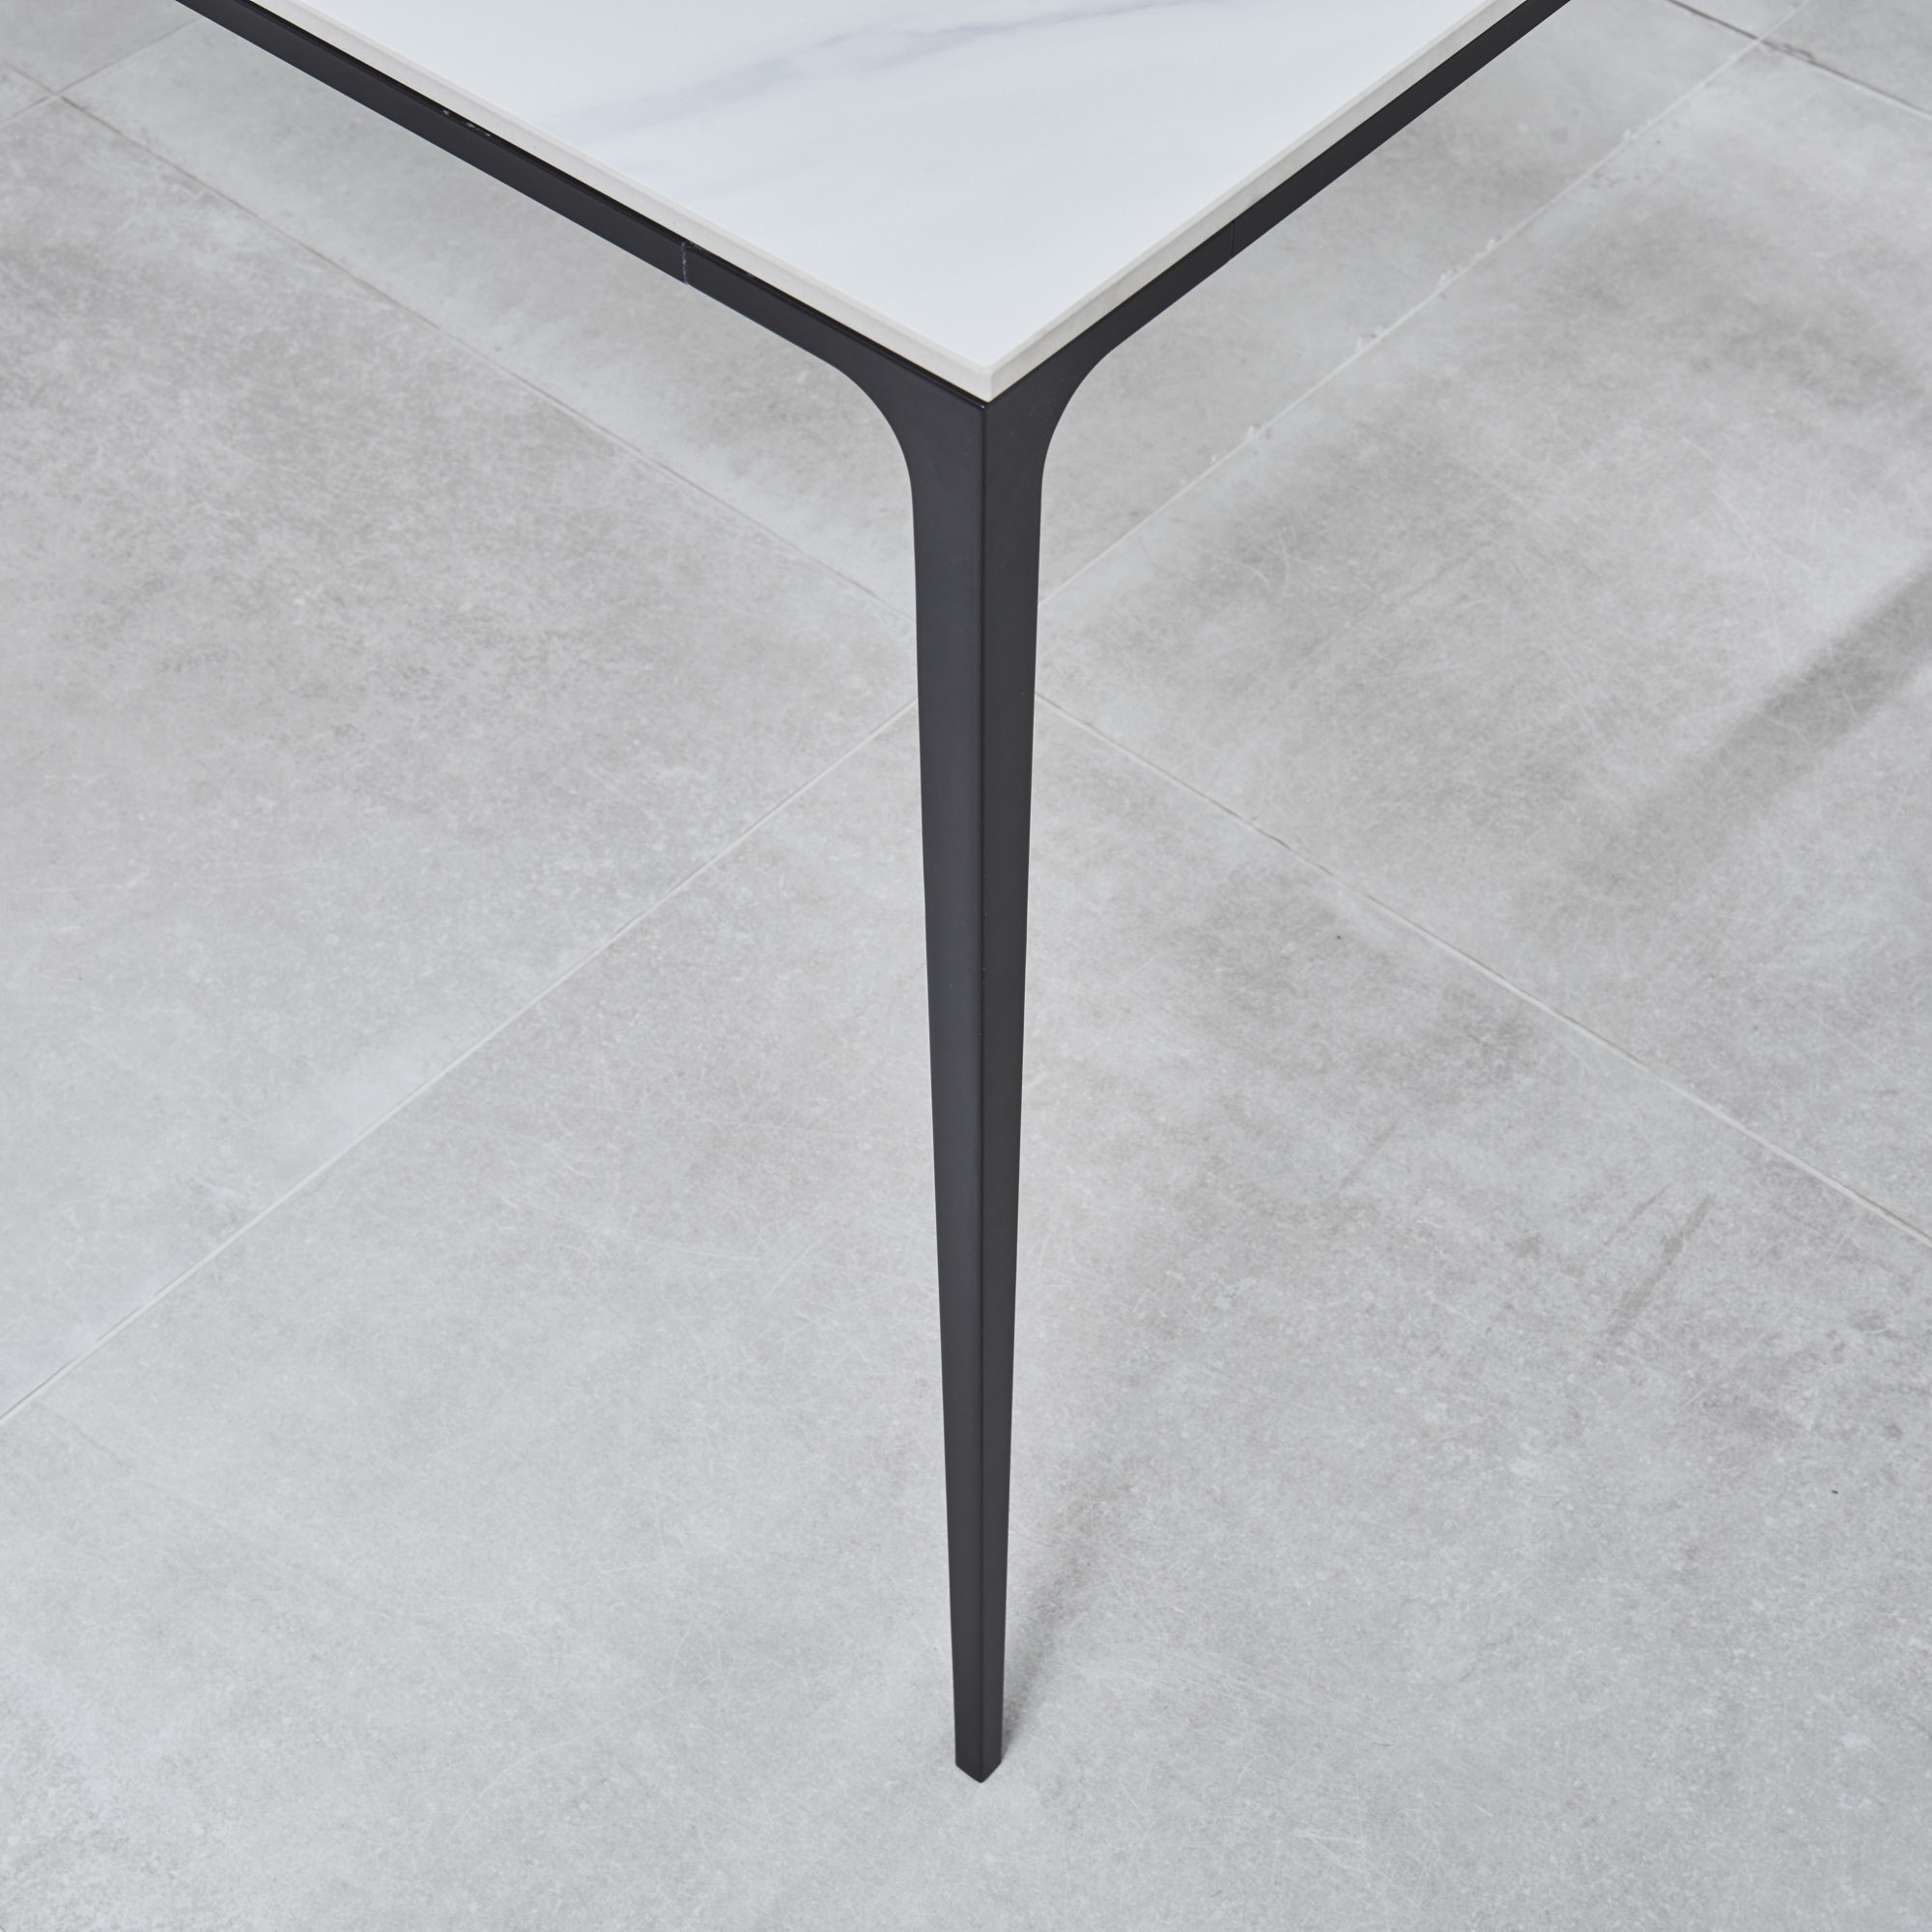 Bellagio 160cm White Sintered Stone Dining Table with Black Contemporary Base (Copy)